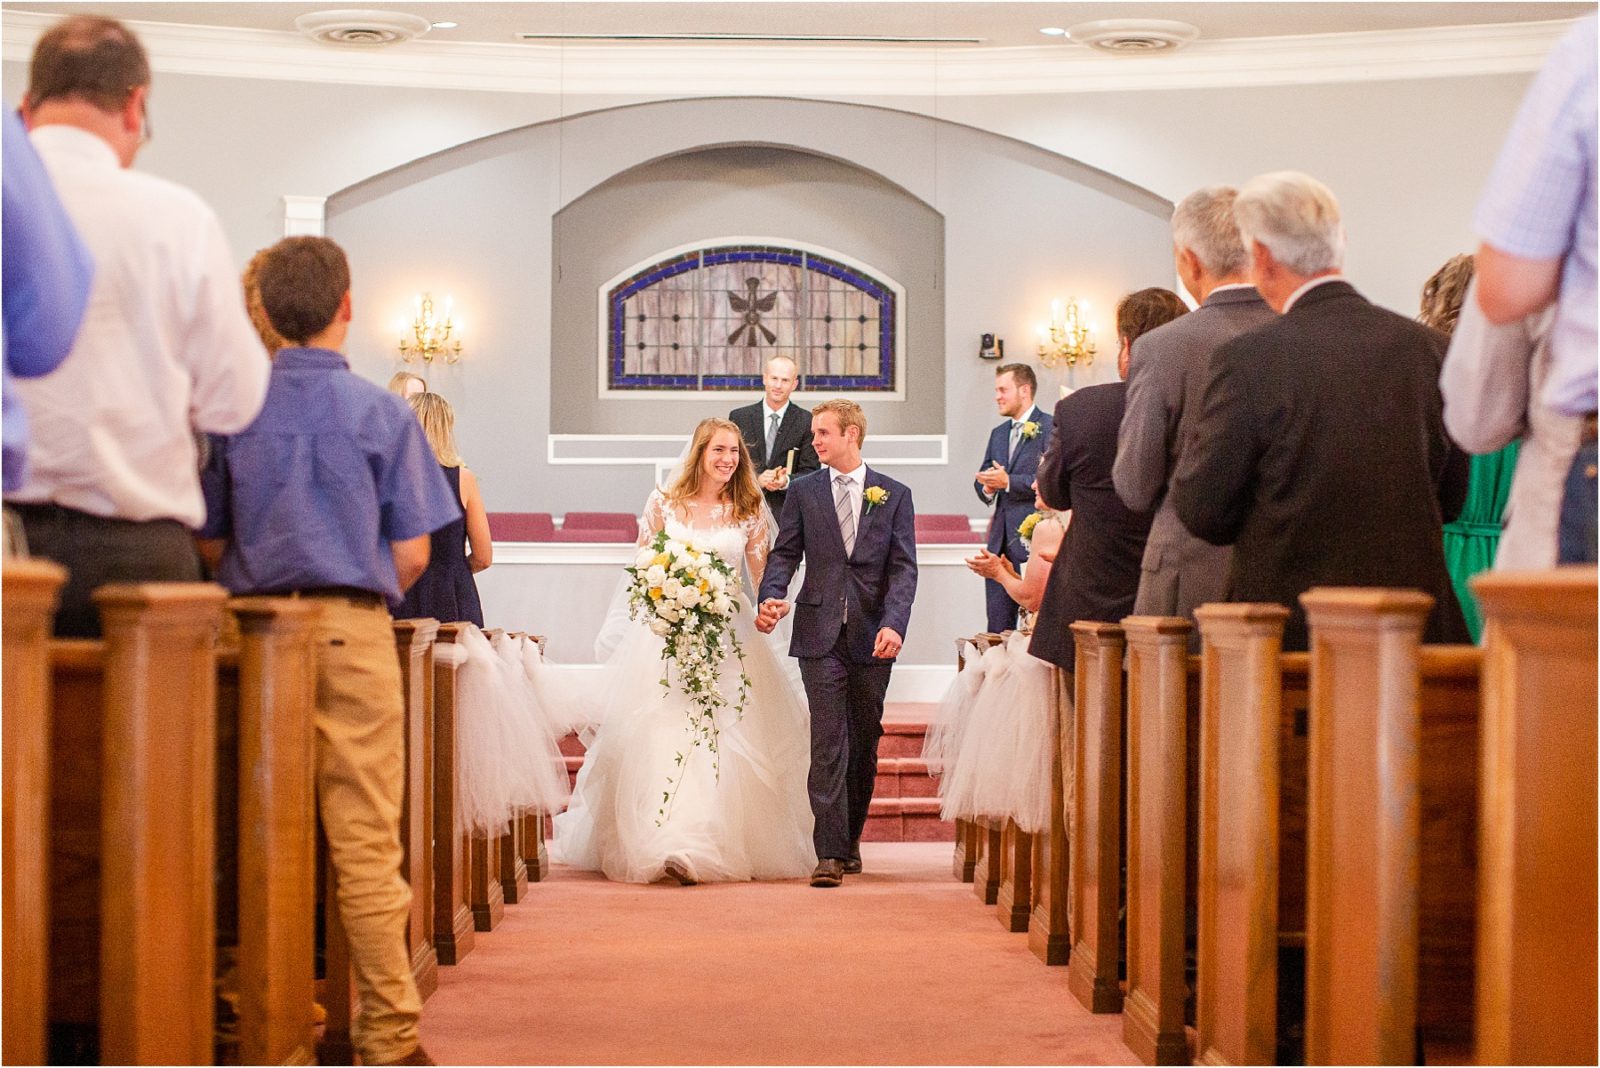 Georgia couple walking down church aisle after getting married